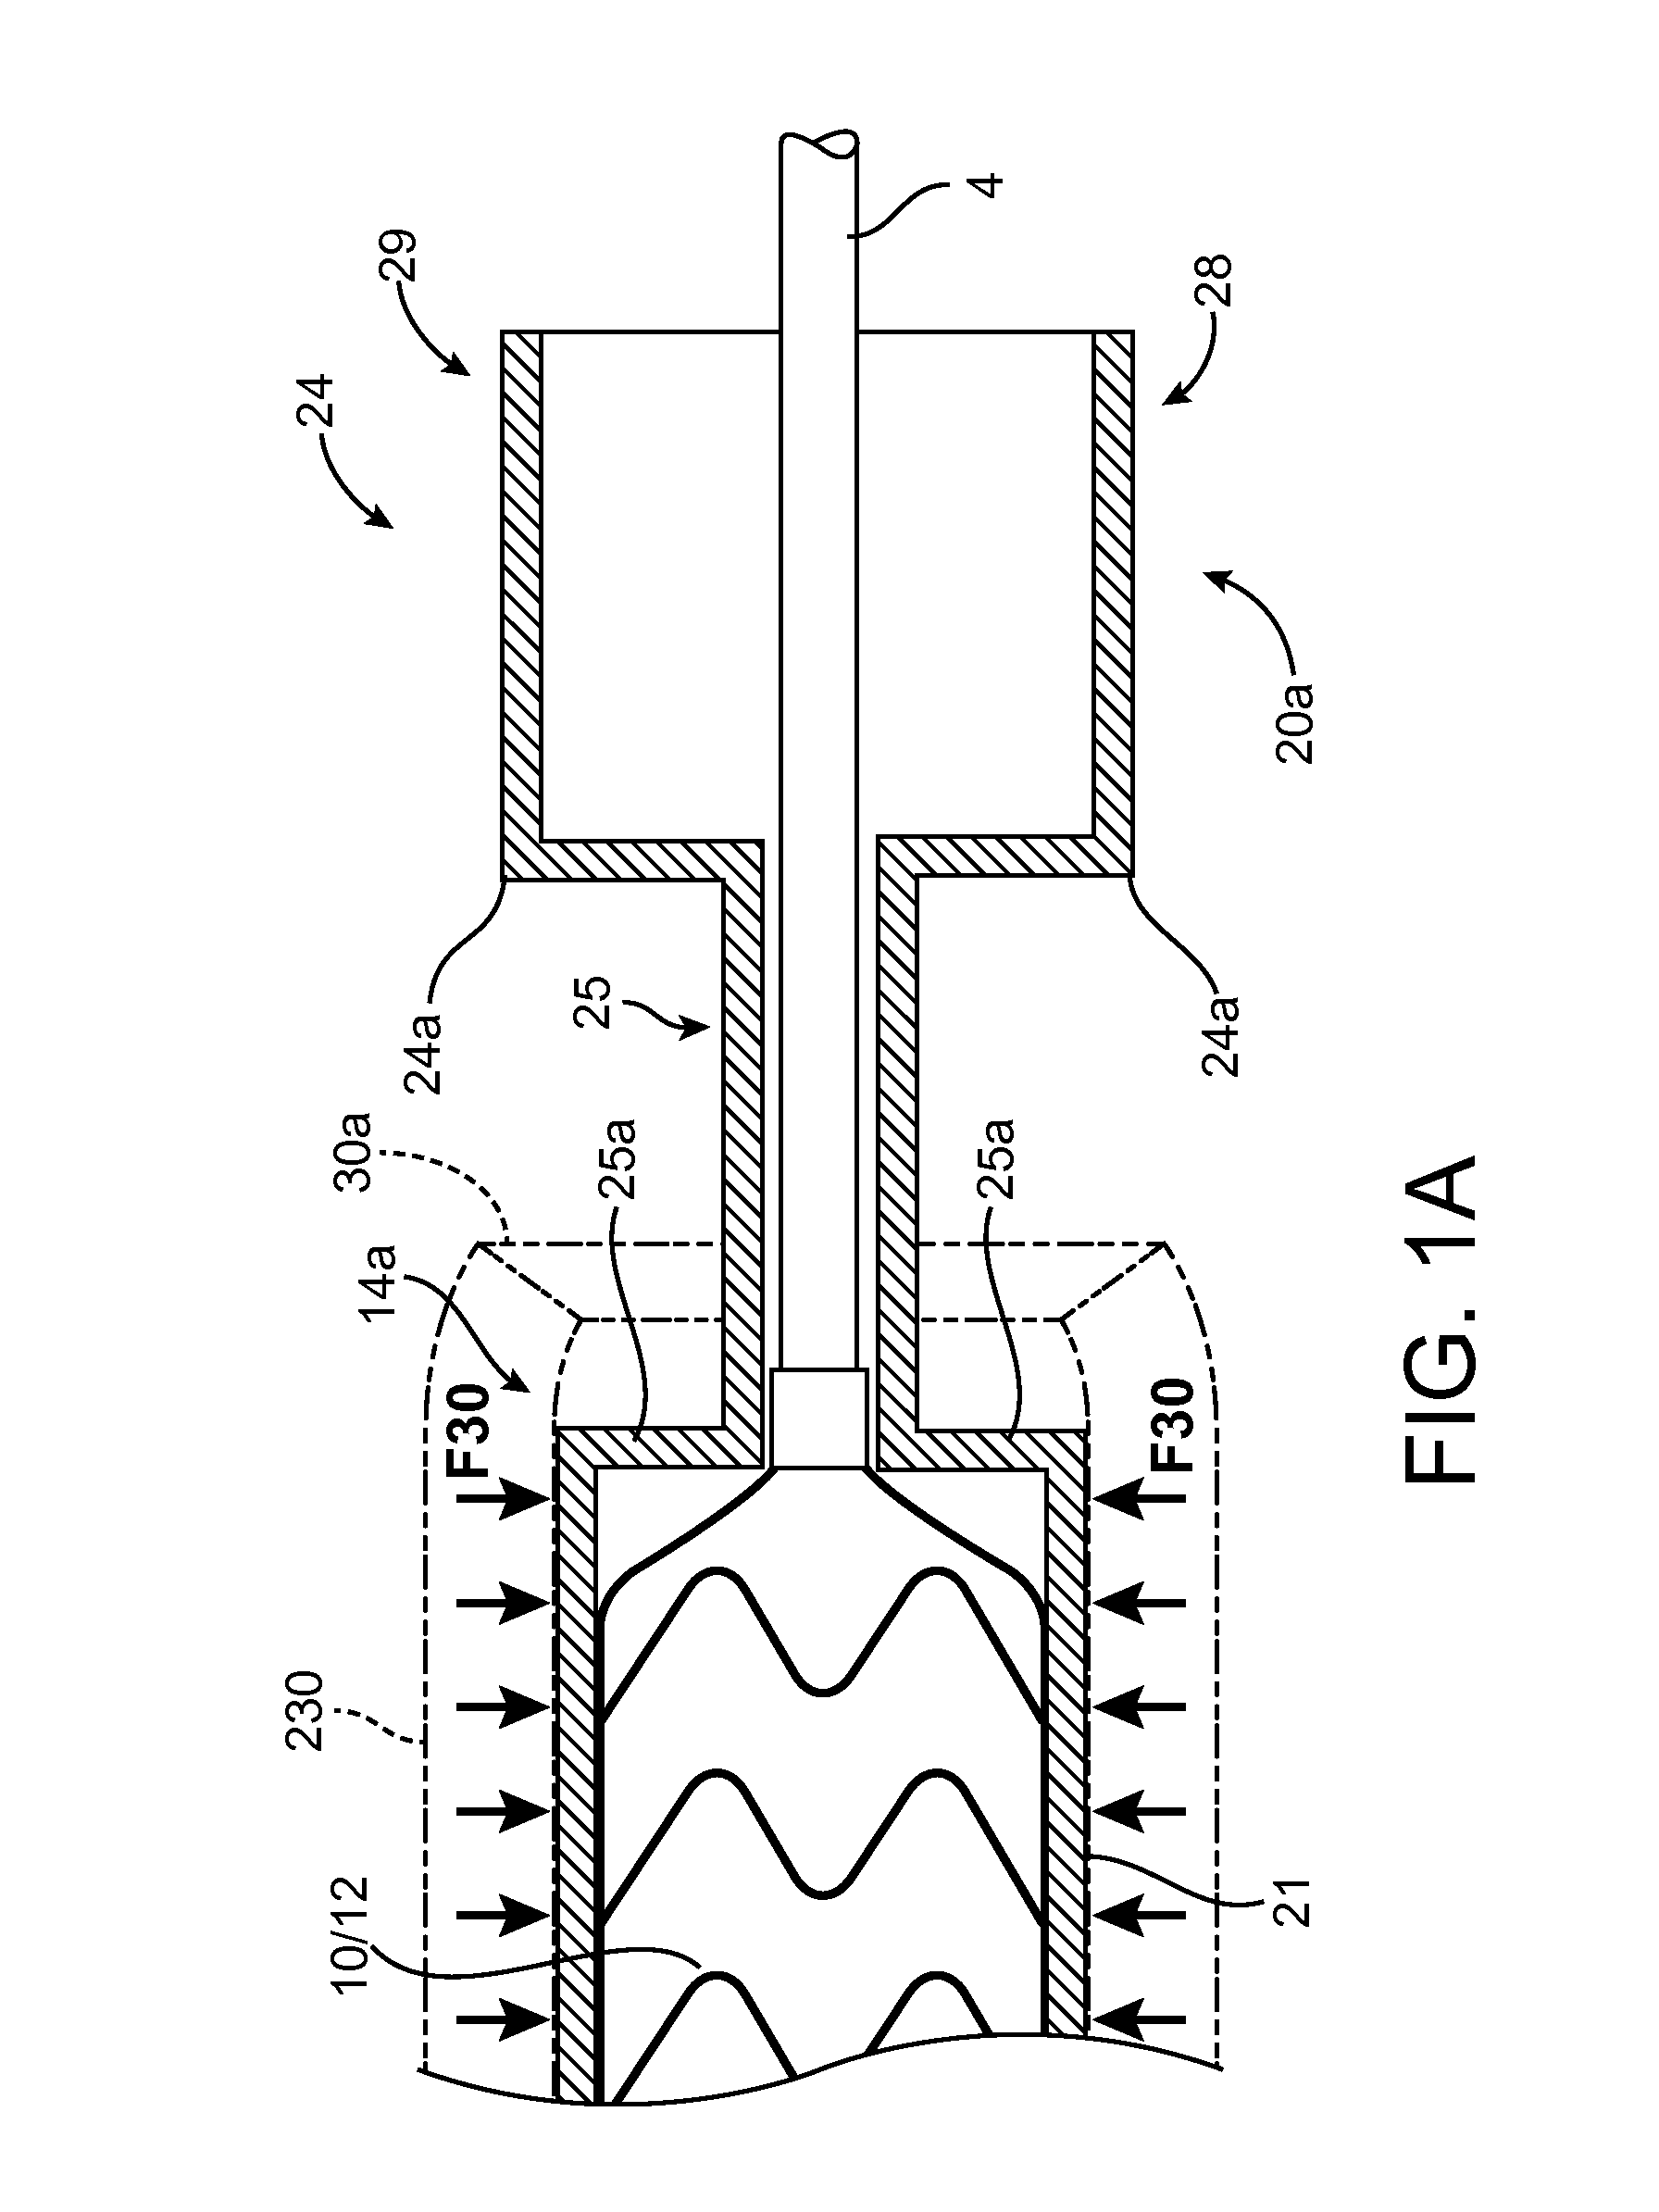 Removable sheath assembly for a polymer scaffold